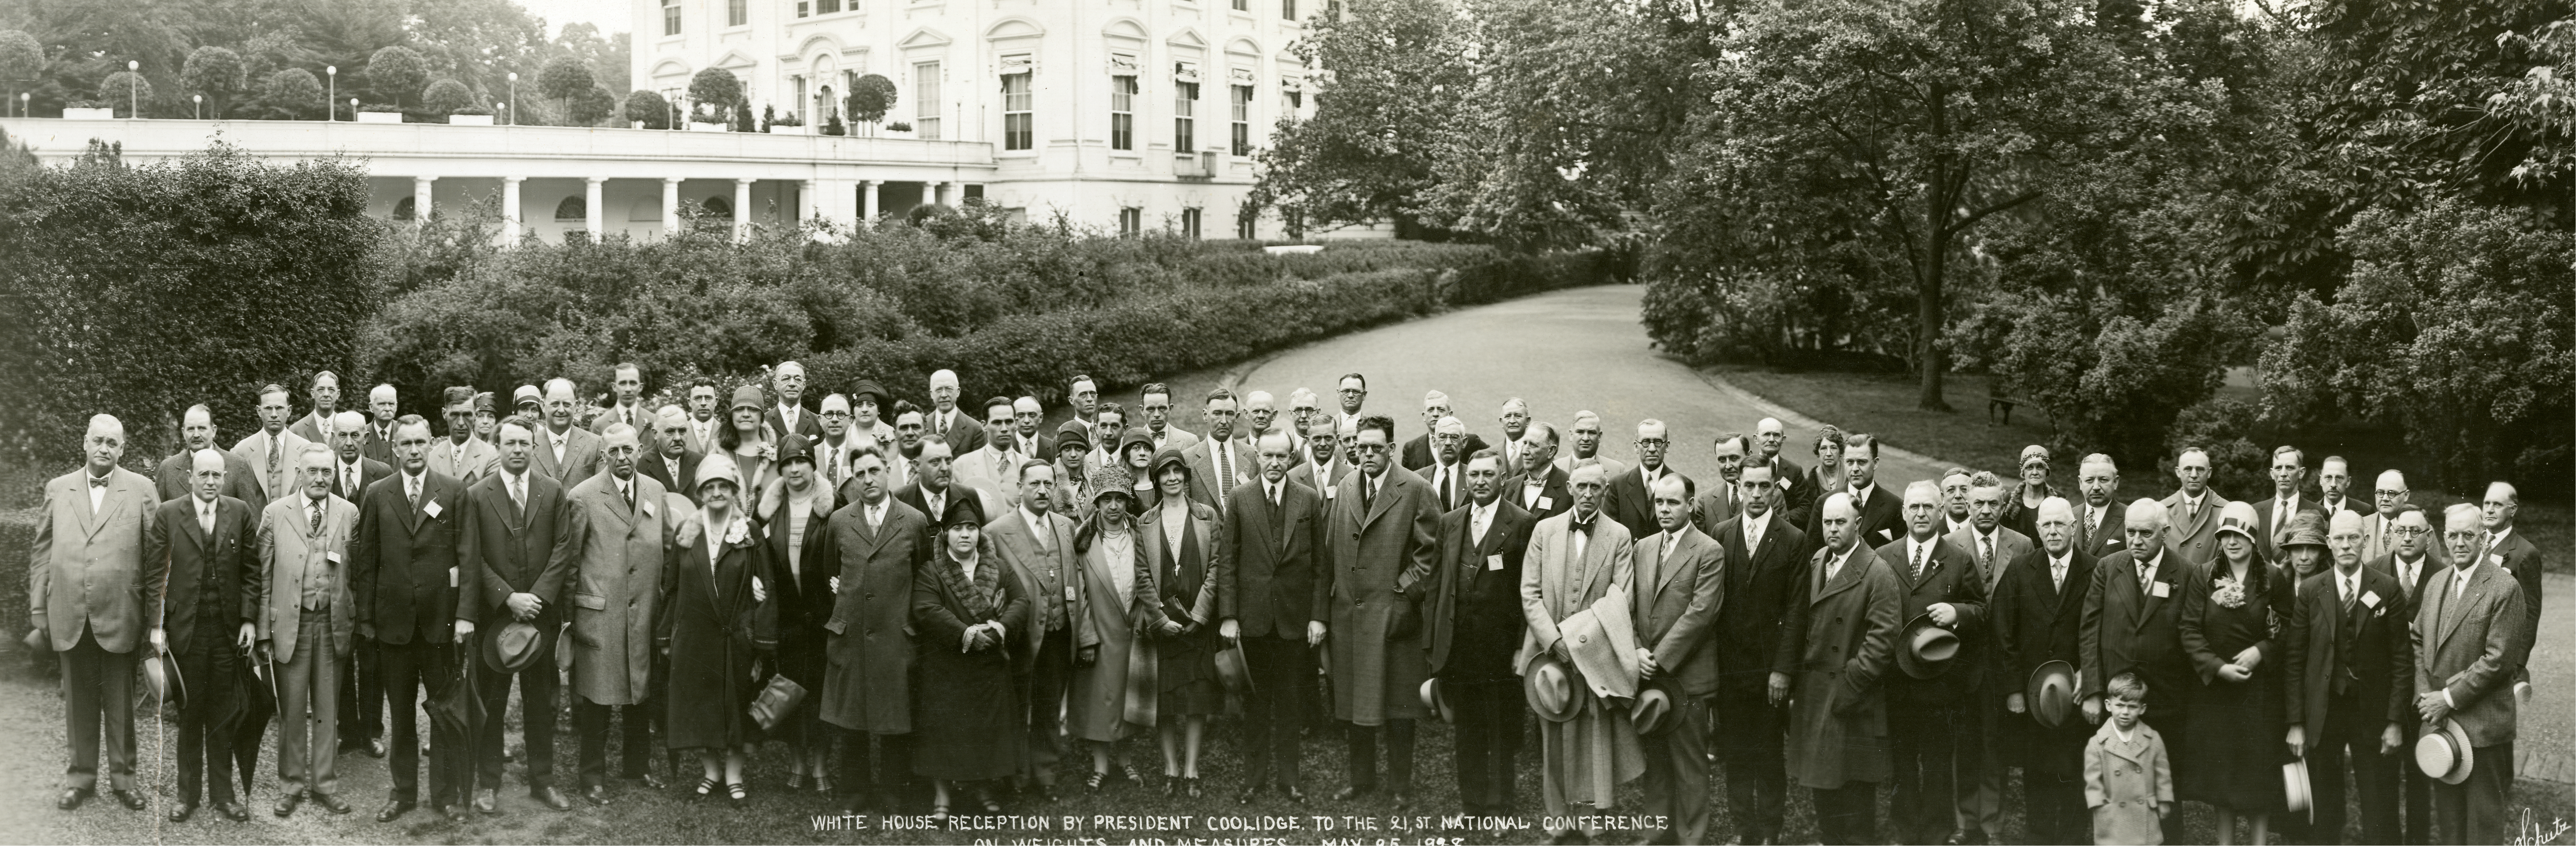 Group photograph of the White House Reception by President Coolidge to the 21st National Conference on Weights and Measures, Washington, DC. May 25, 1928.